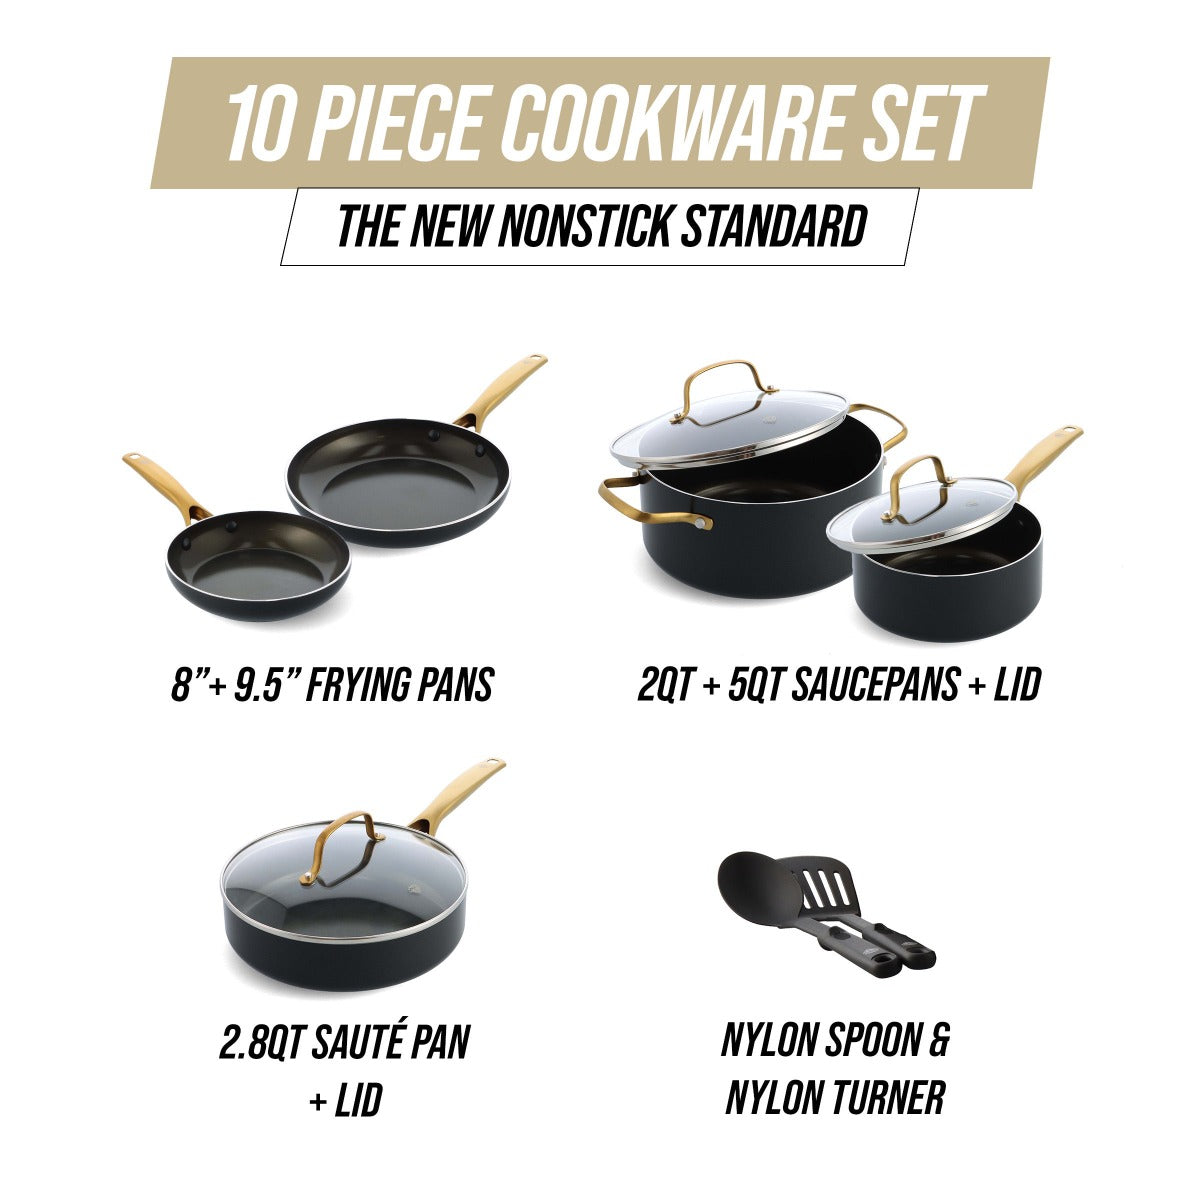 Black and Gold Nonstick Pots and Pans Set